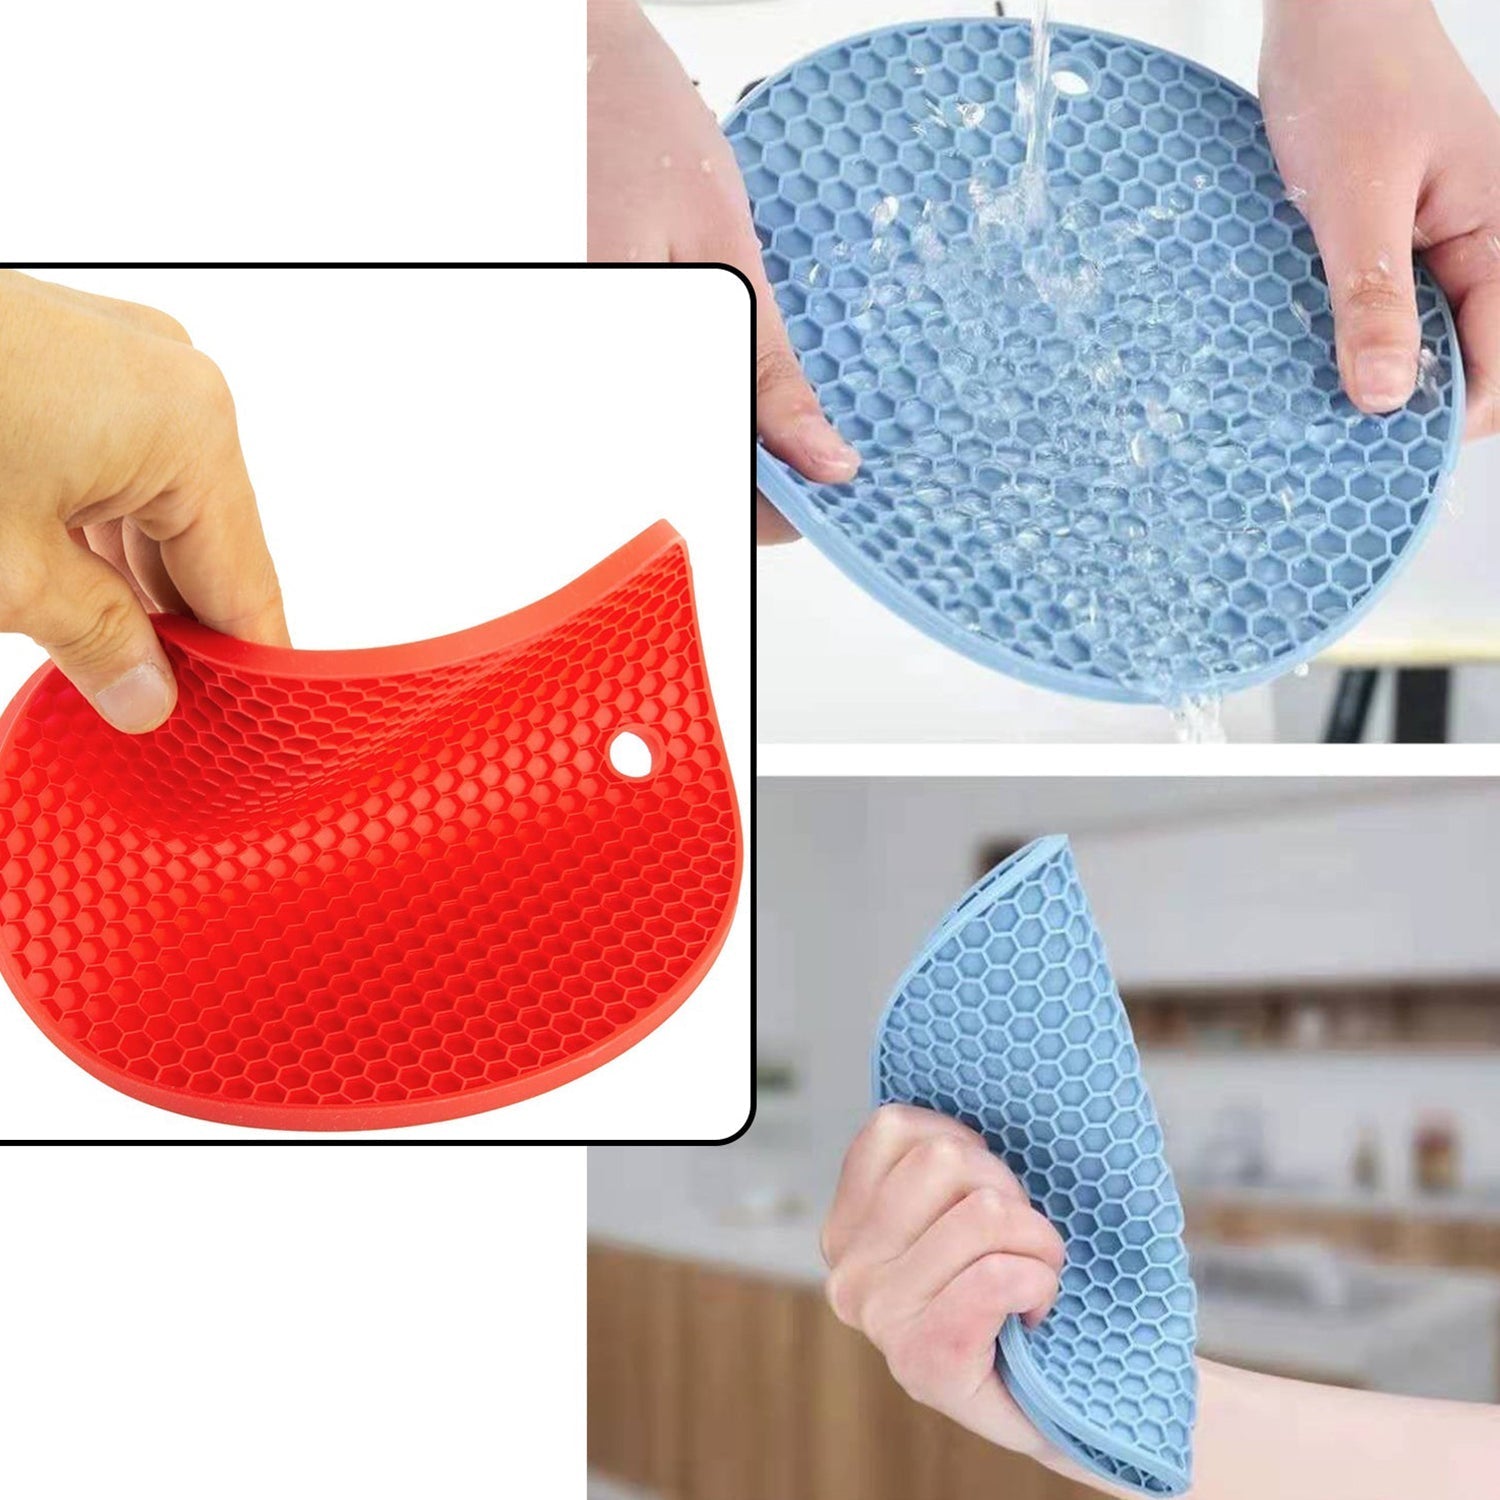 4846 4 Pc Silicon Hot Mat For Placing Hot Vessels And Utensils Over It Easily Without Having Any Visible Marks On Surfaces. DeoDap